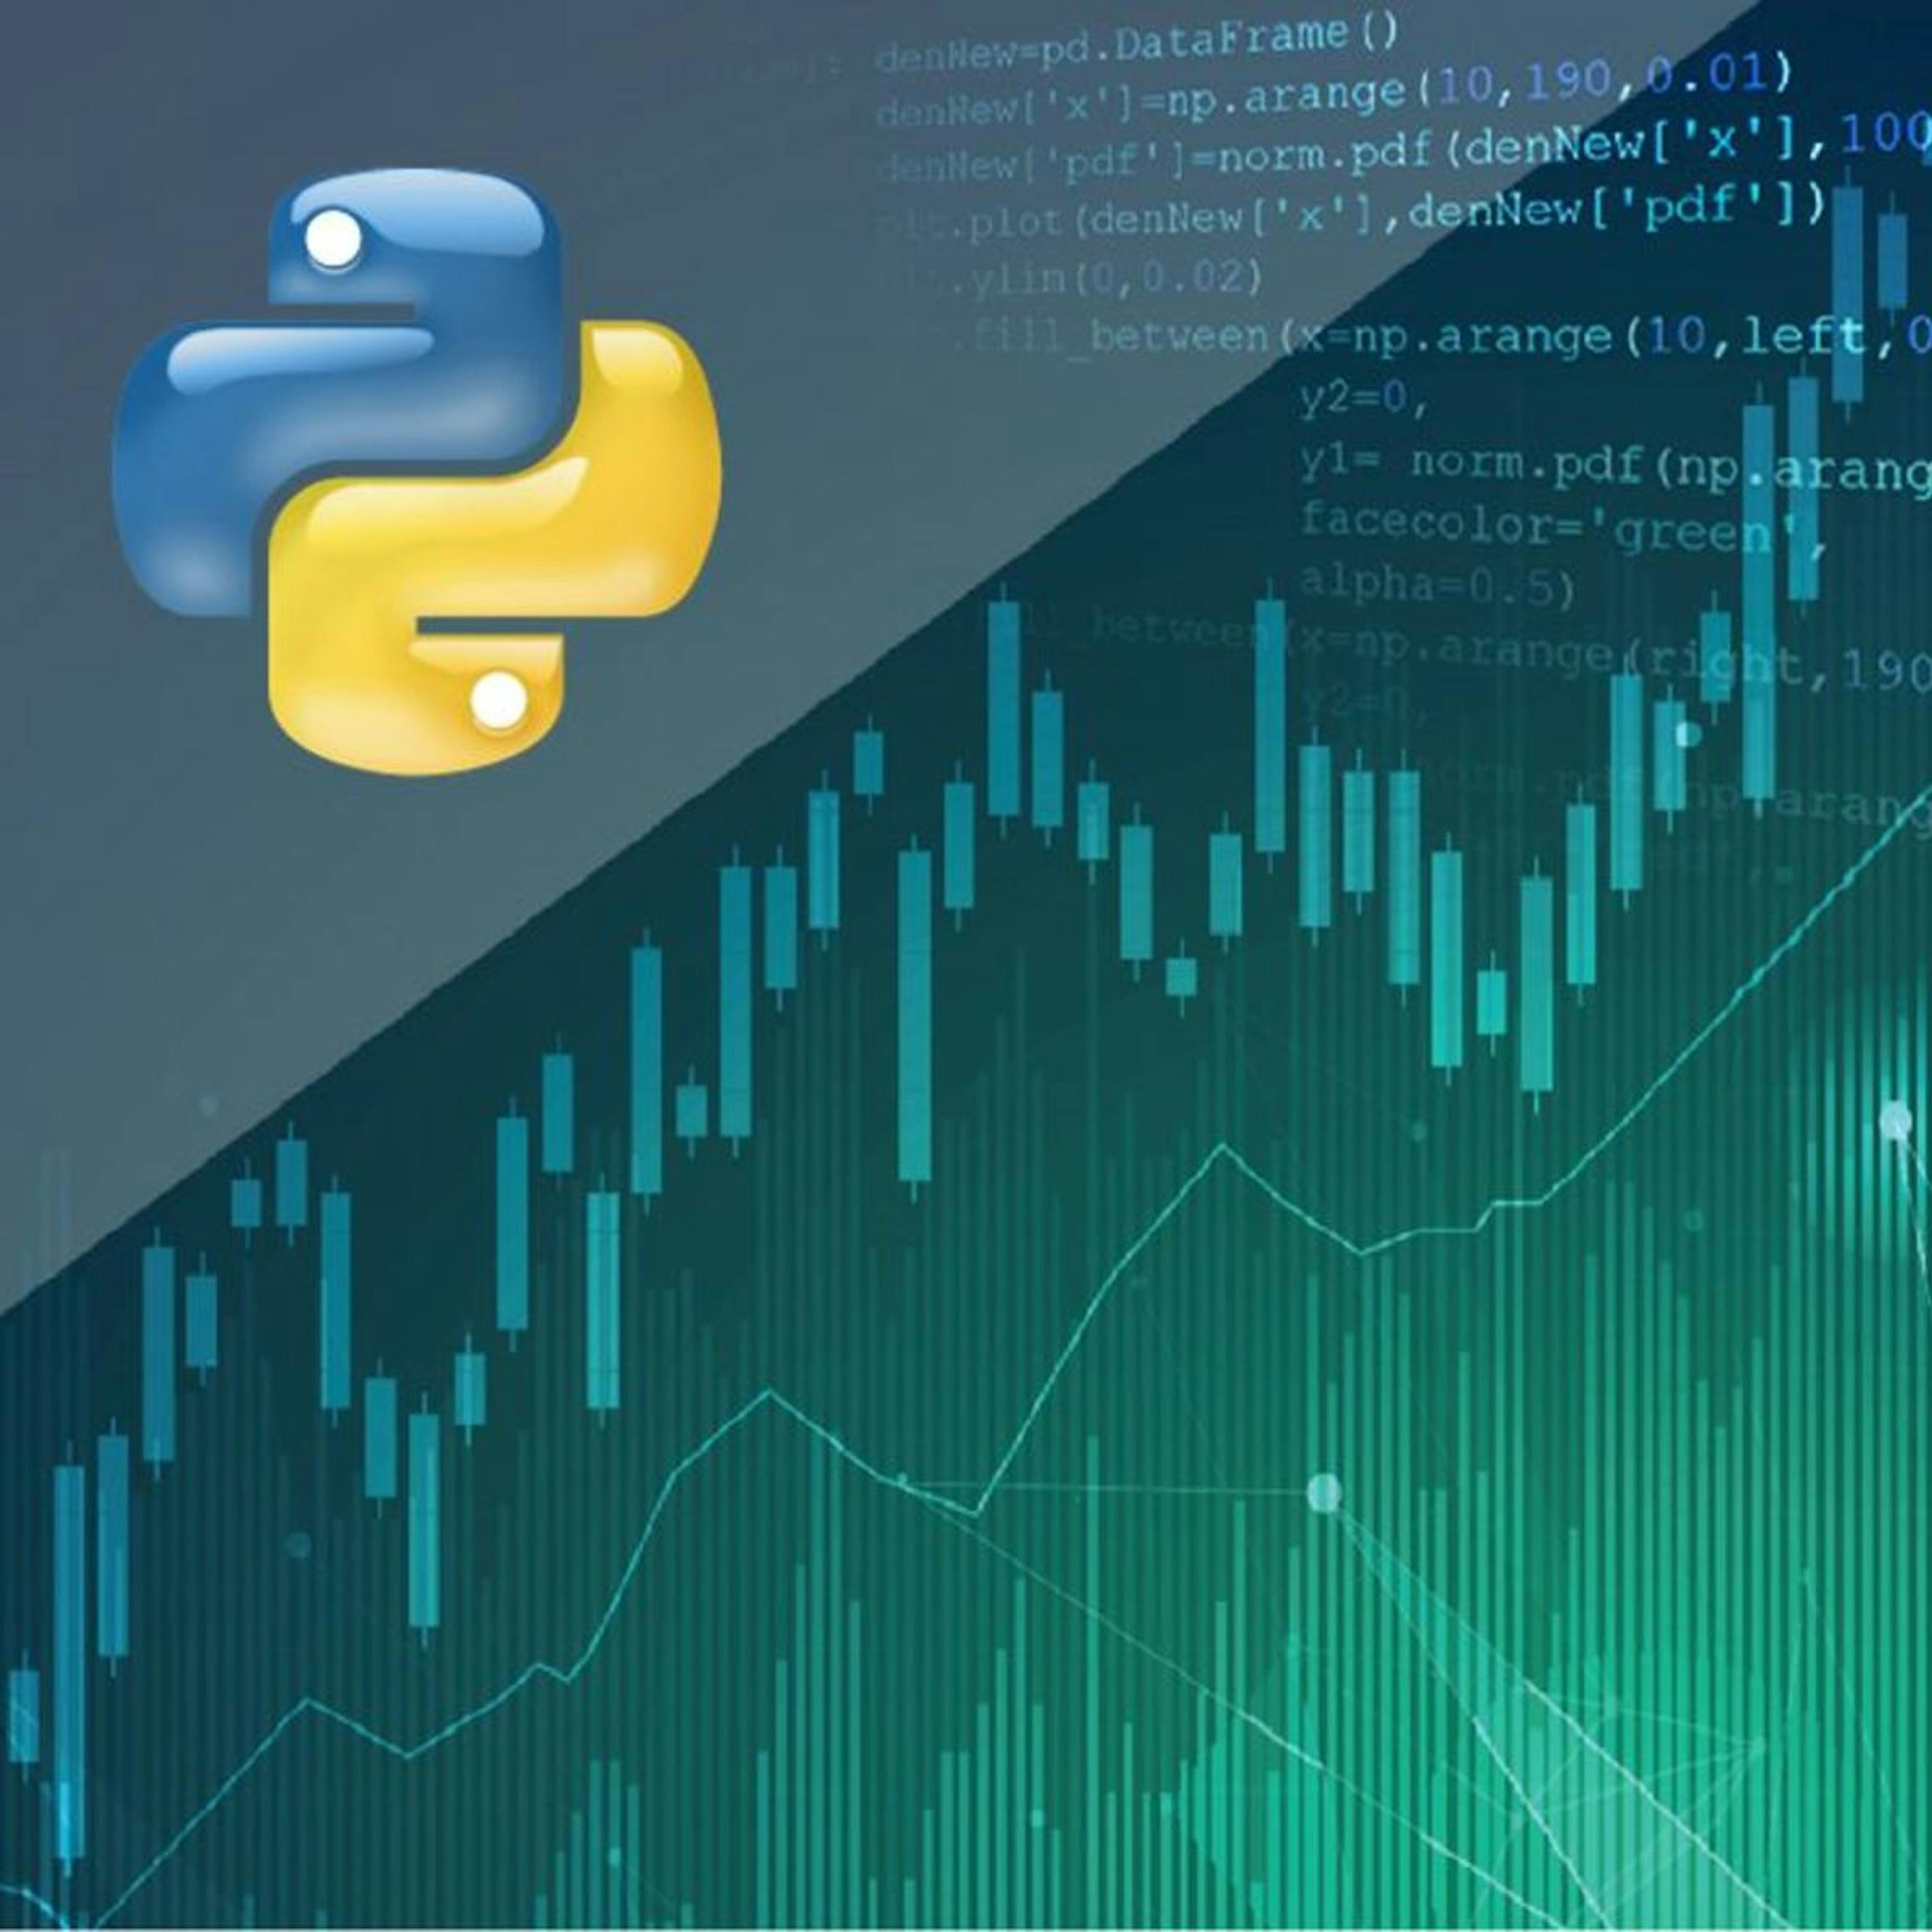 Best Way To Learn Python For Finance - FinanceViewer